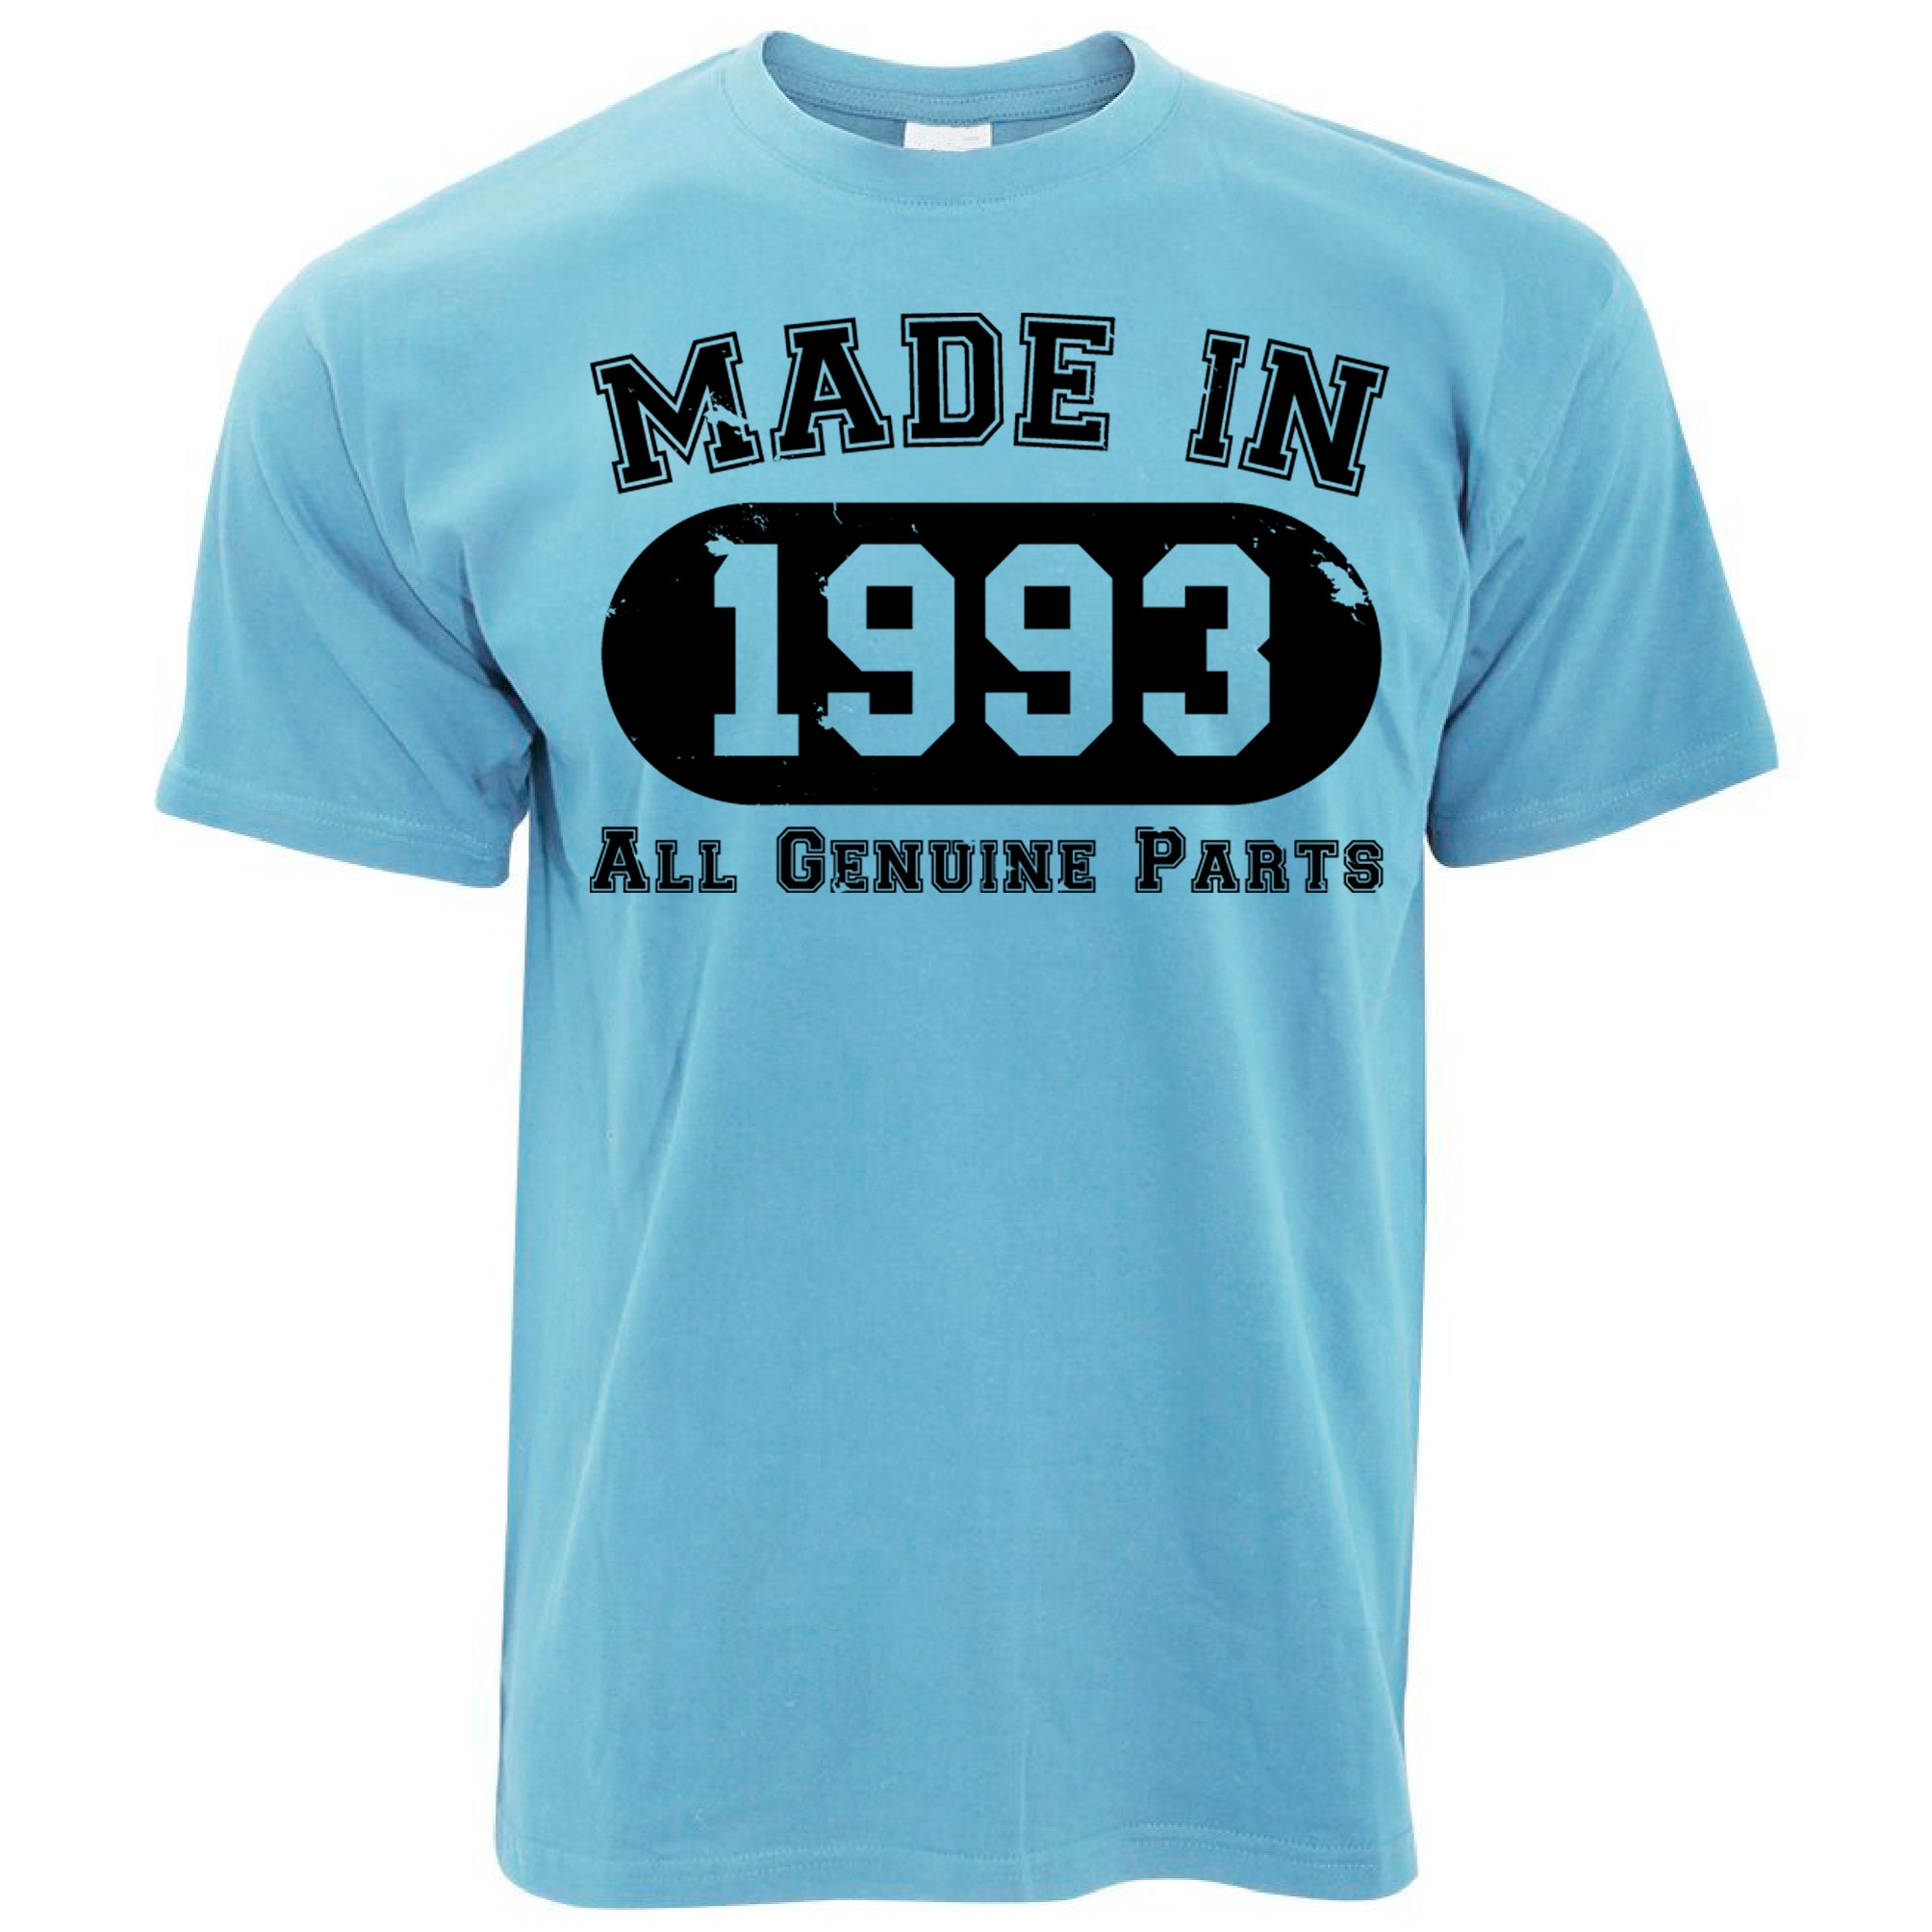 30th Birthday T Shirt Made in 1993 - All Genuine Parts